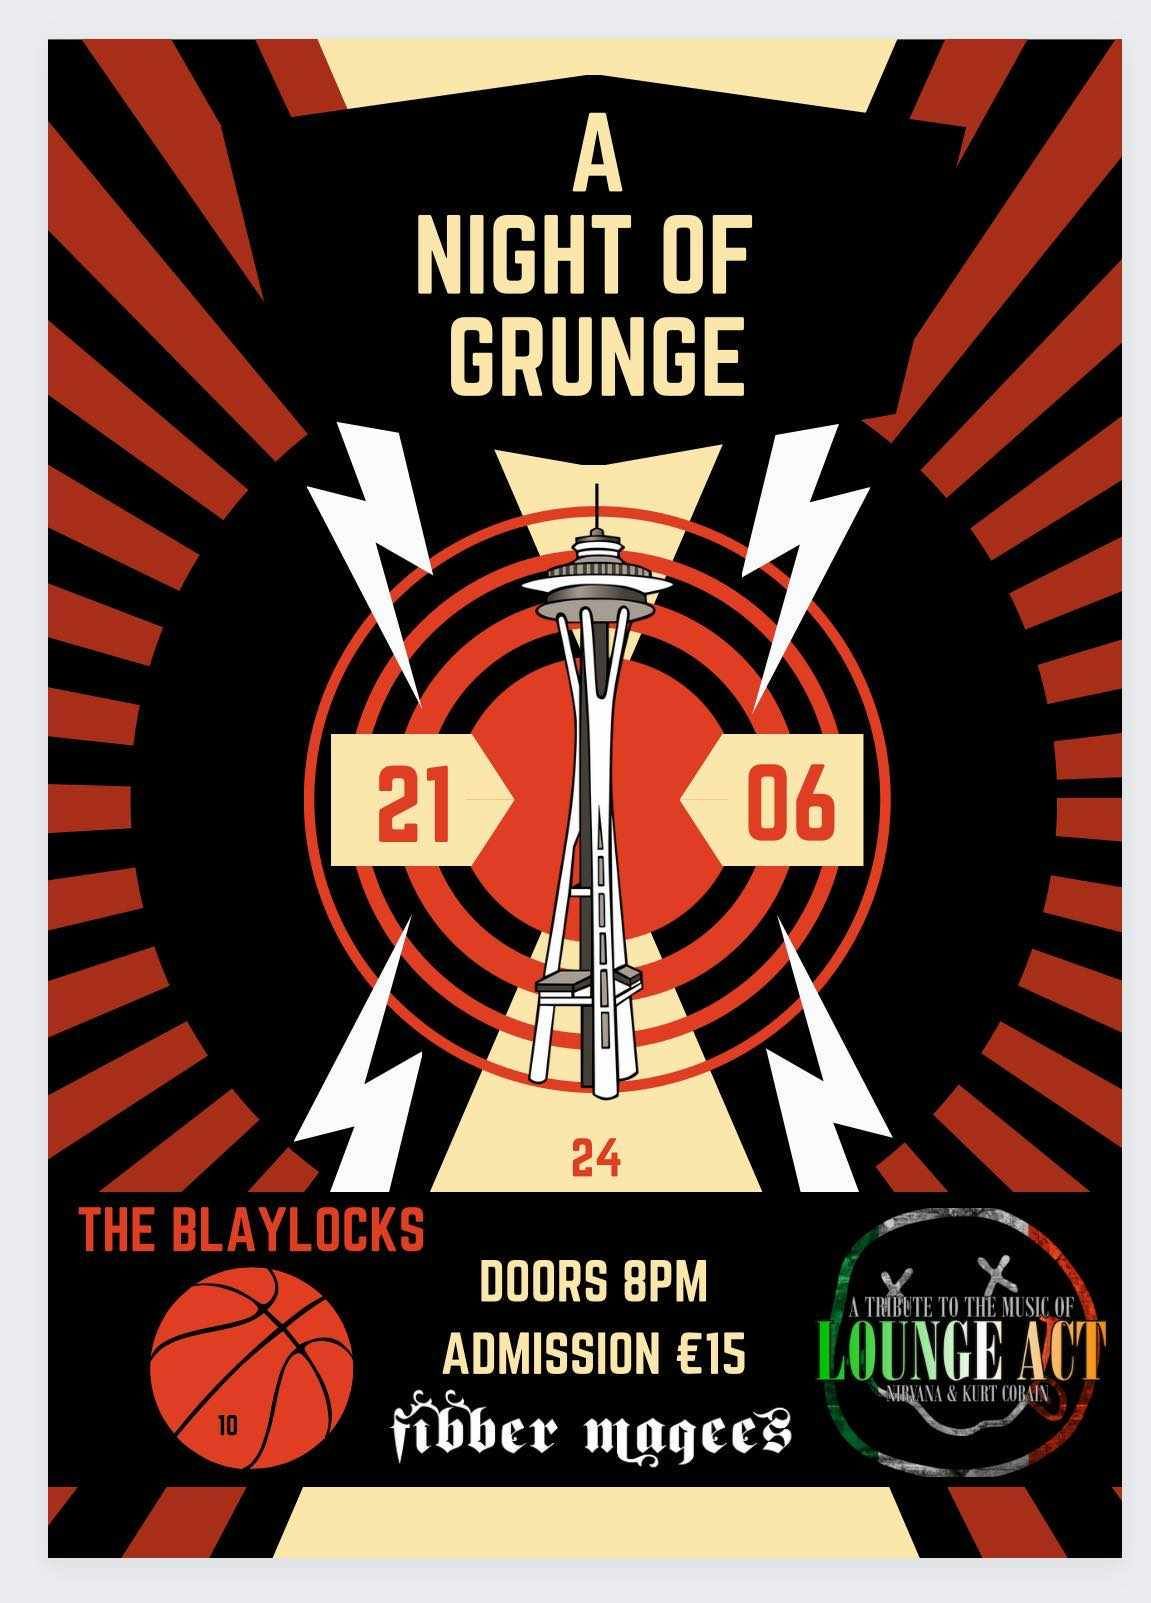 A Night of Grunge with The Blaylocks a Tribute to Pearl Jam and Lounge Act a Tribute to Nirvana